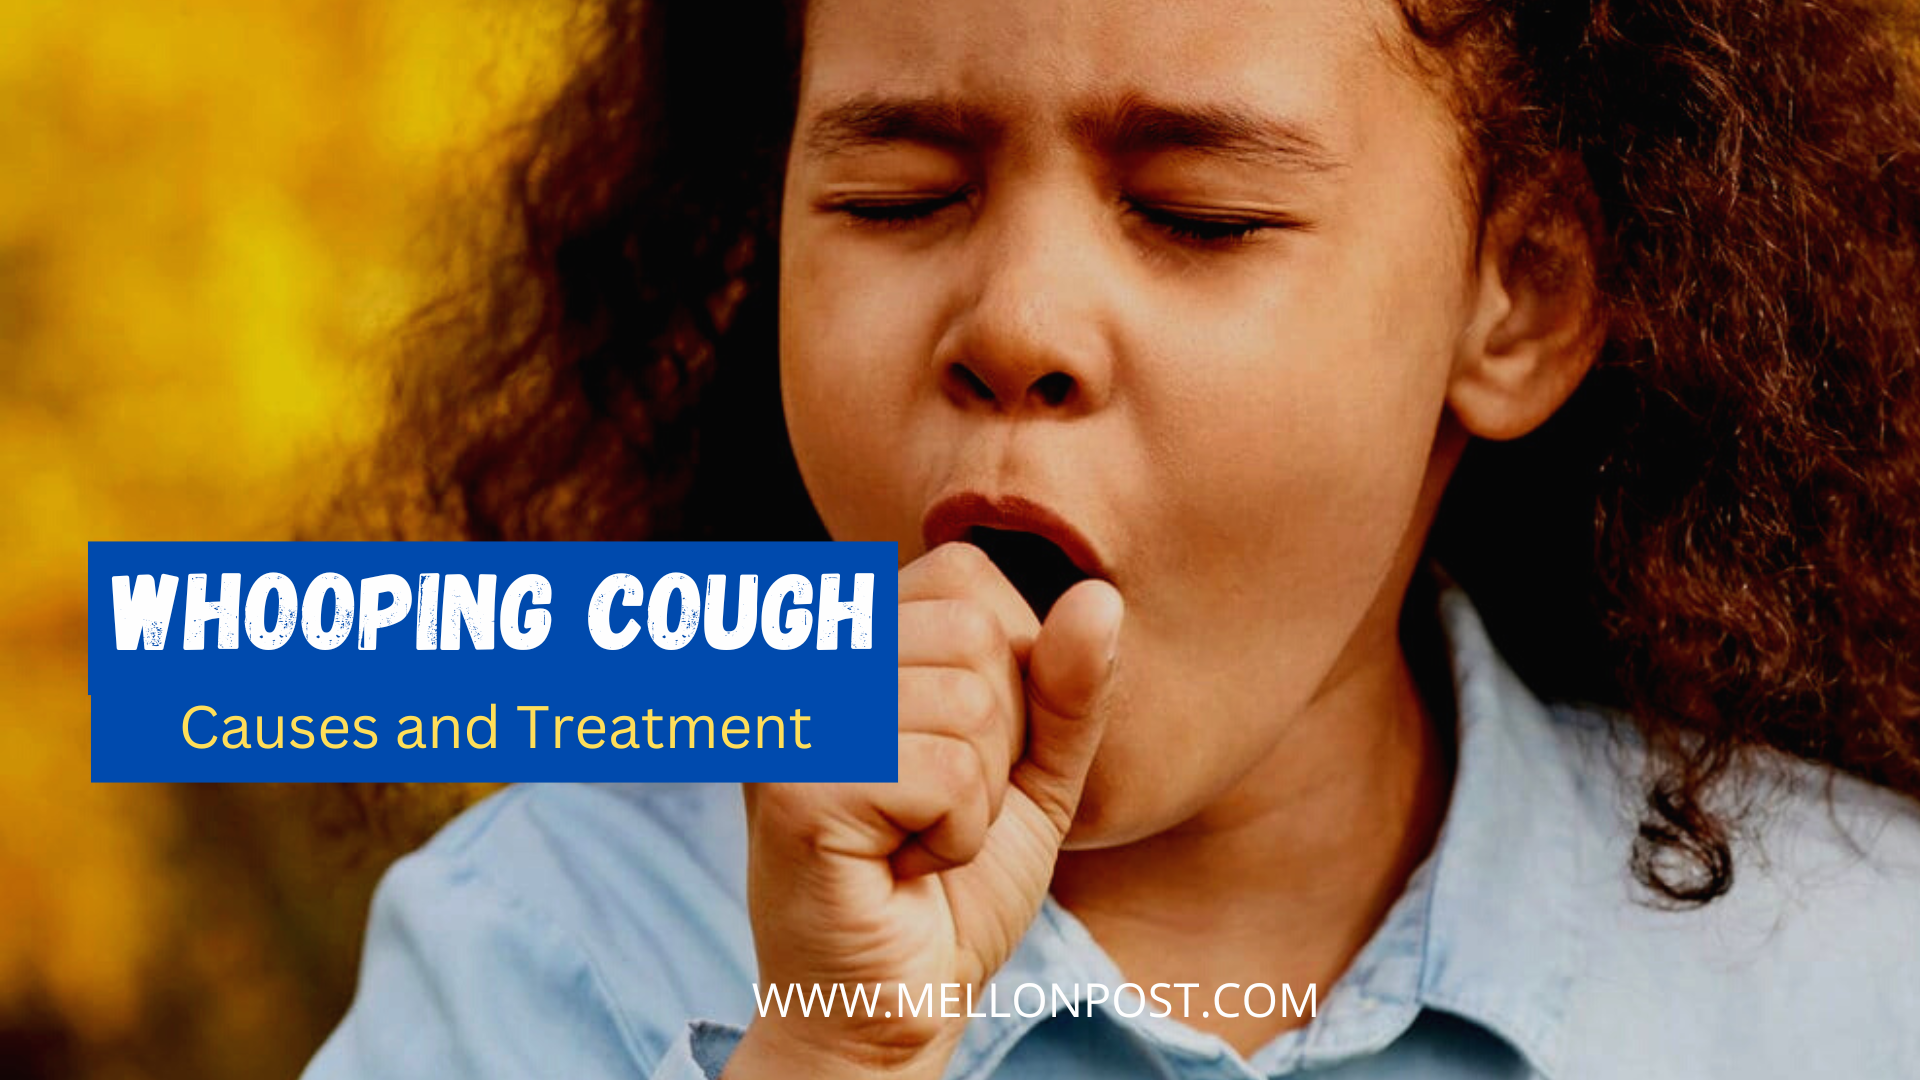 whooping cough